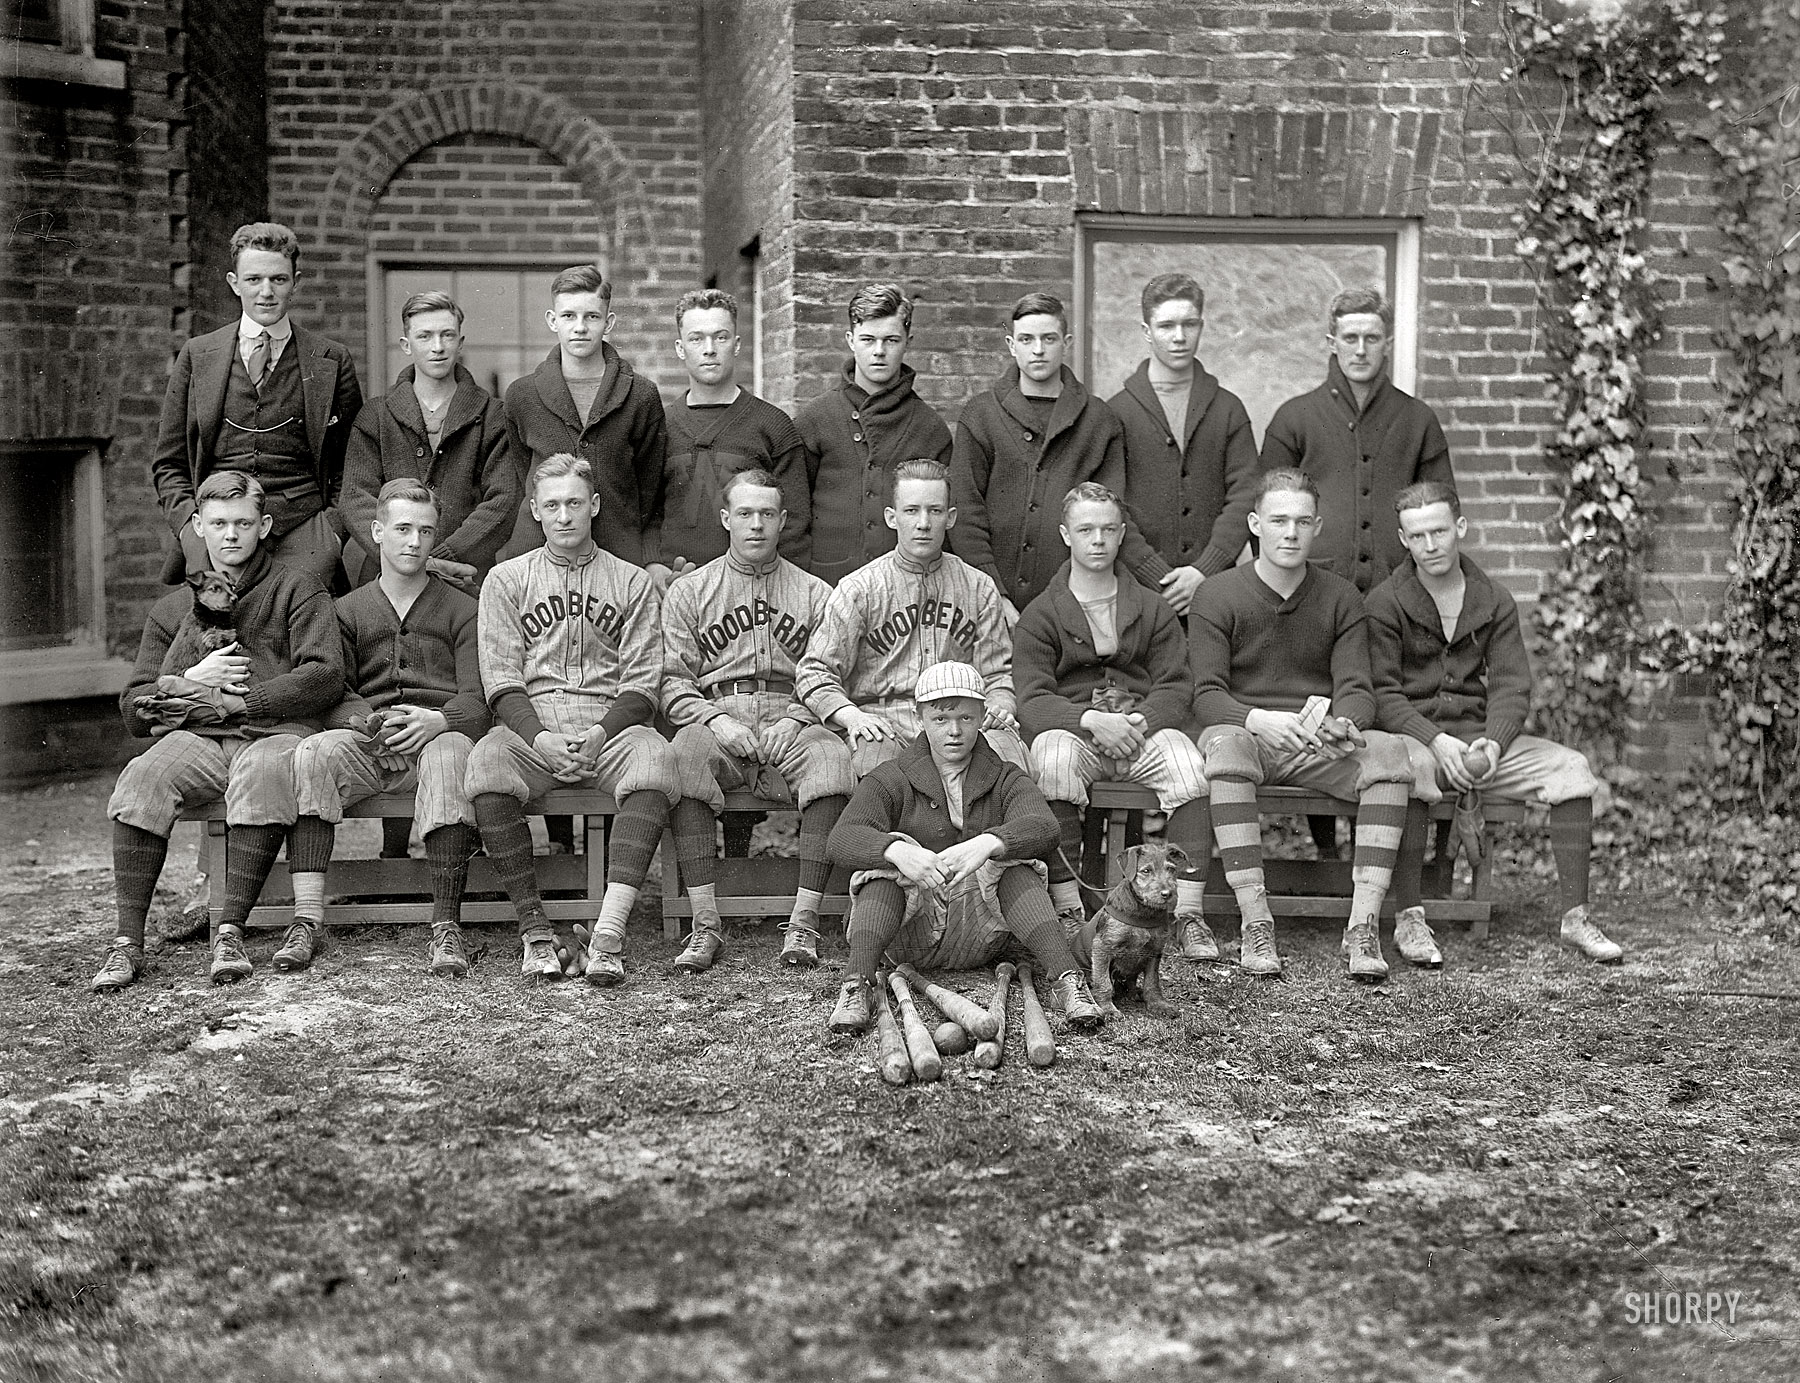 Orange, Virginia, circa 1910. "Woodberry Forest baseball team." And a couple of mascots. Harris & Ewing Collection glass negative. View full size.